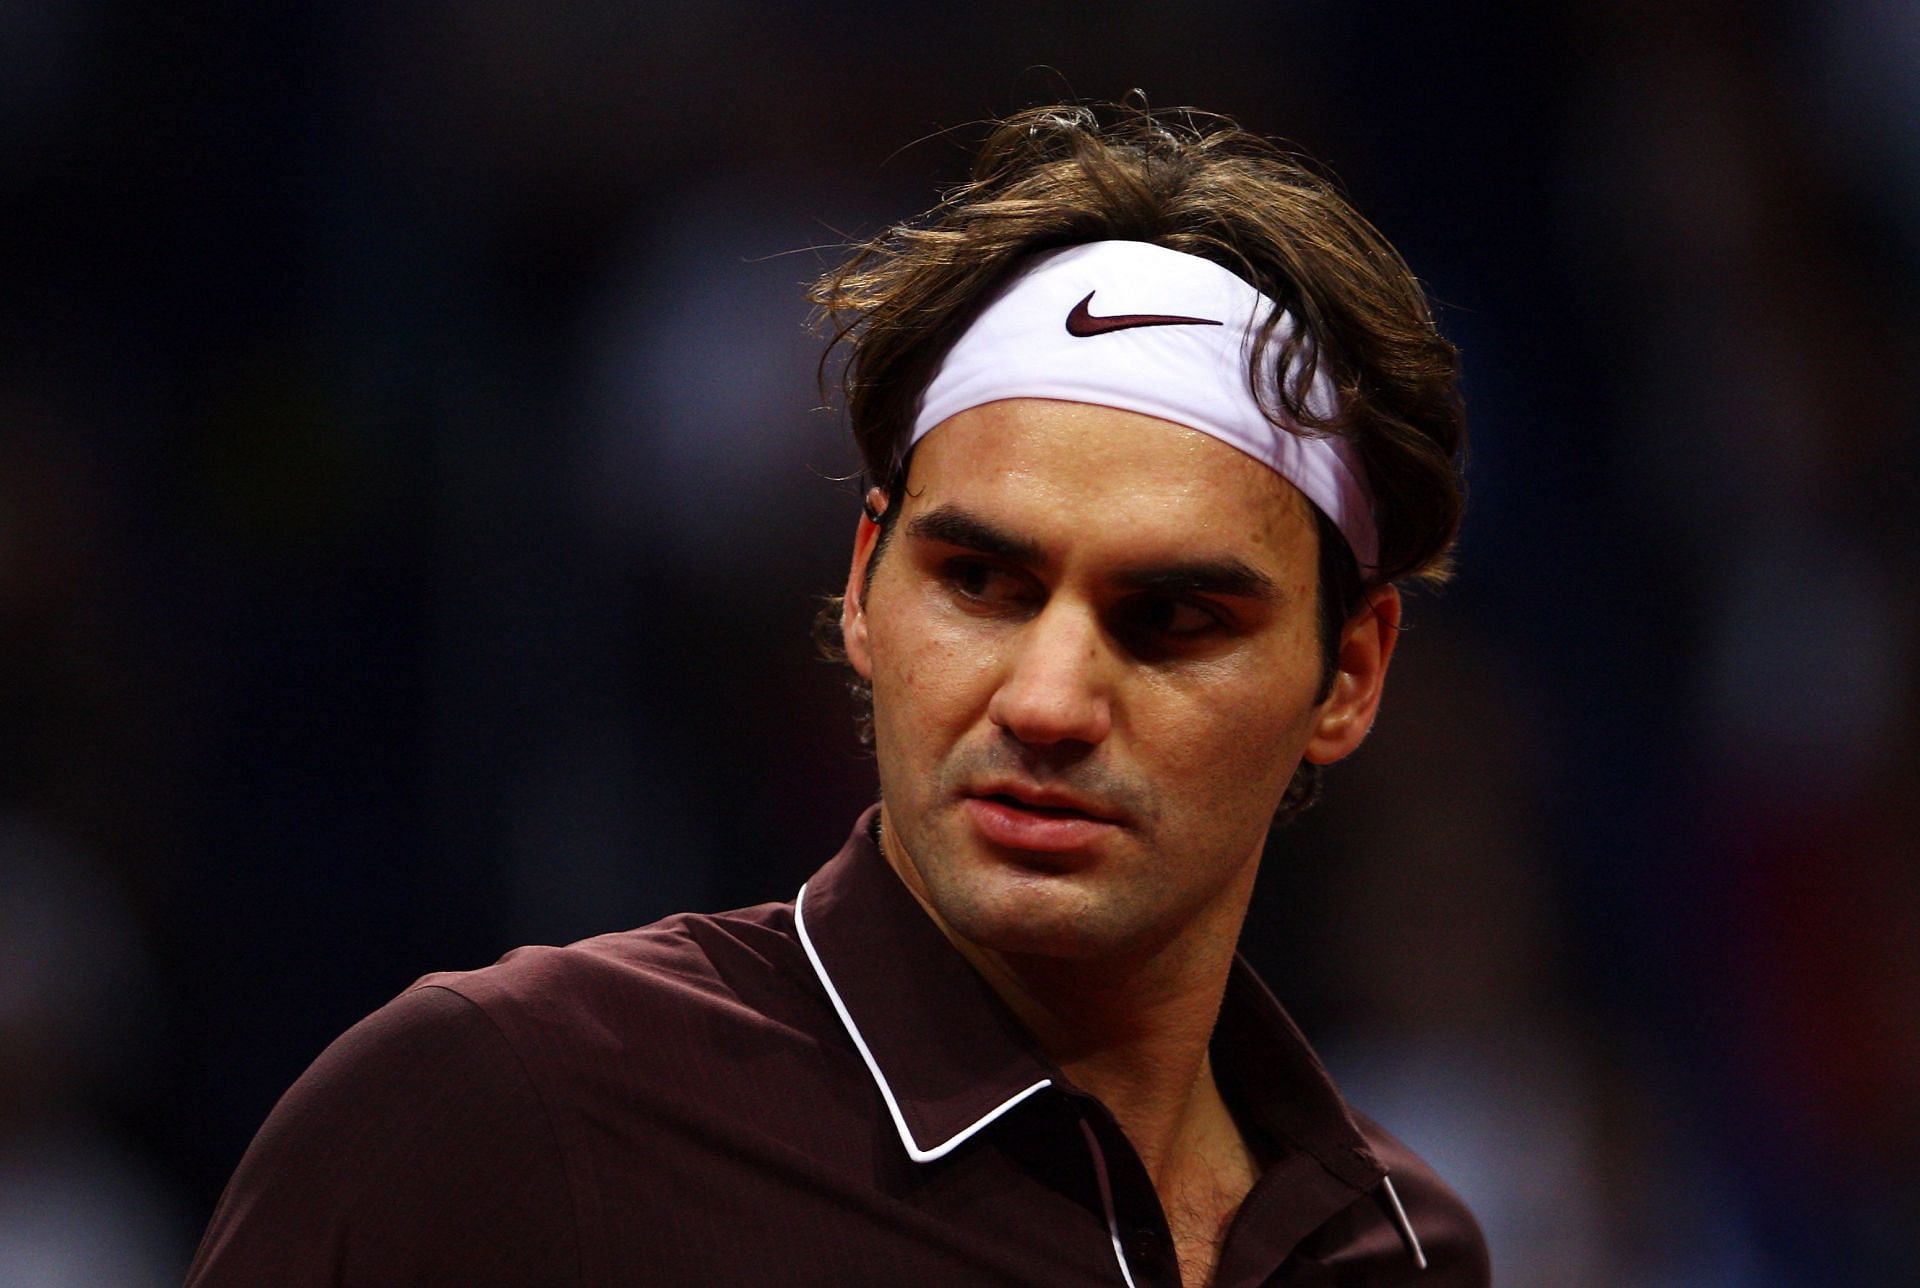 The Swiss will be seen in action at the Laver Cup and the Swiss Indoors this year